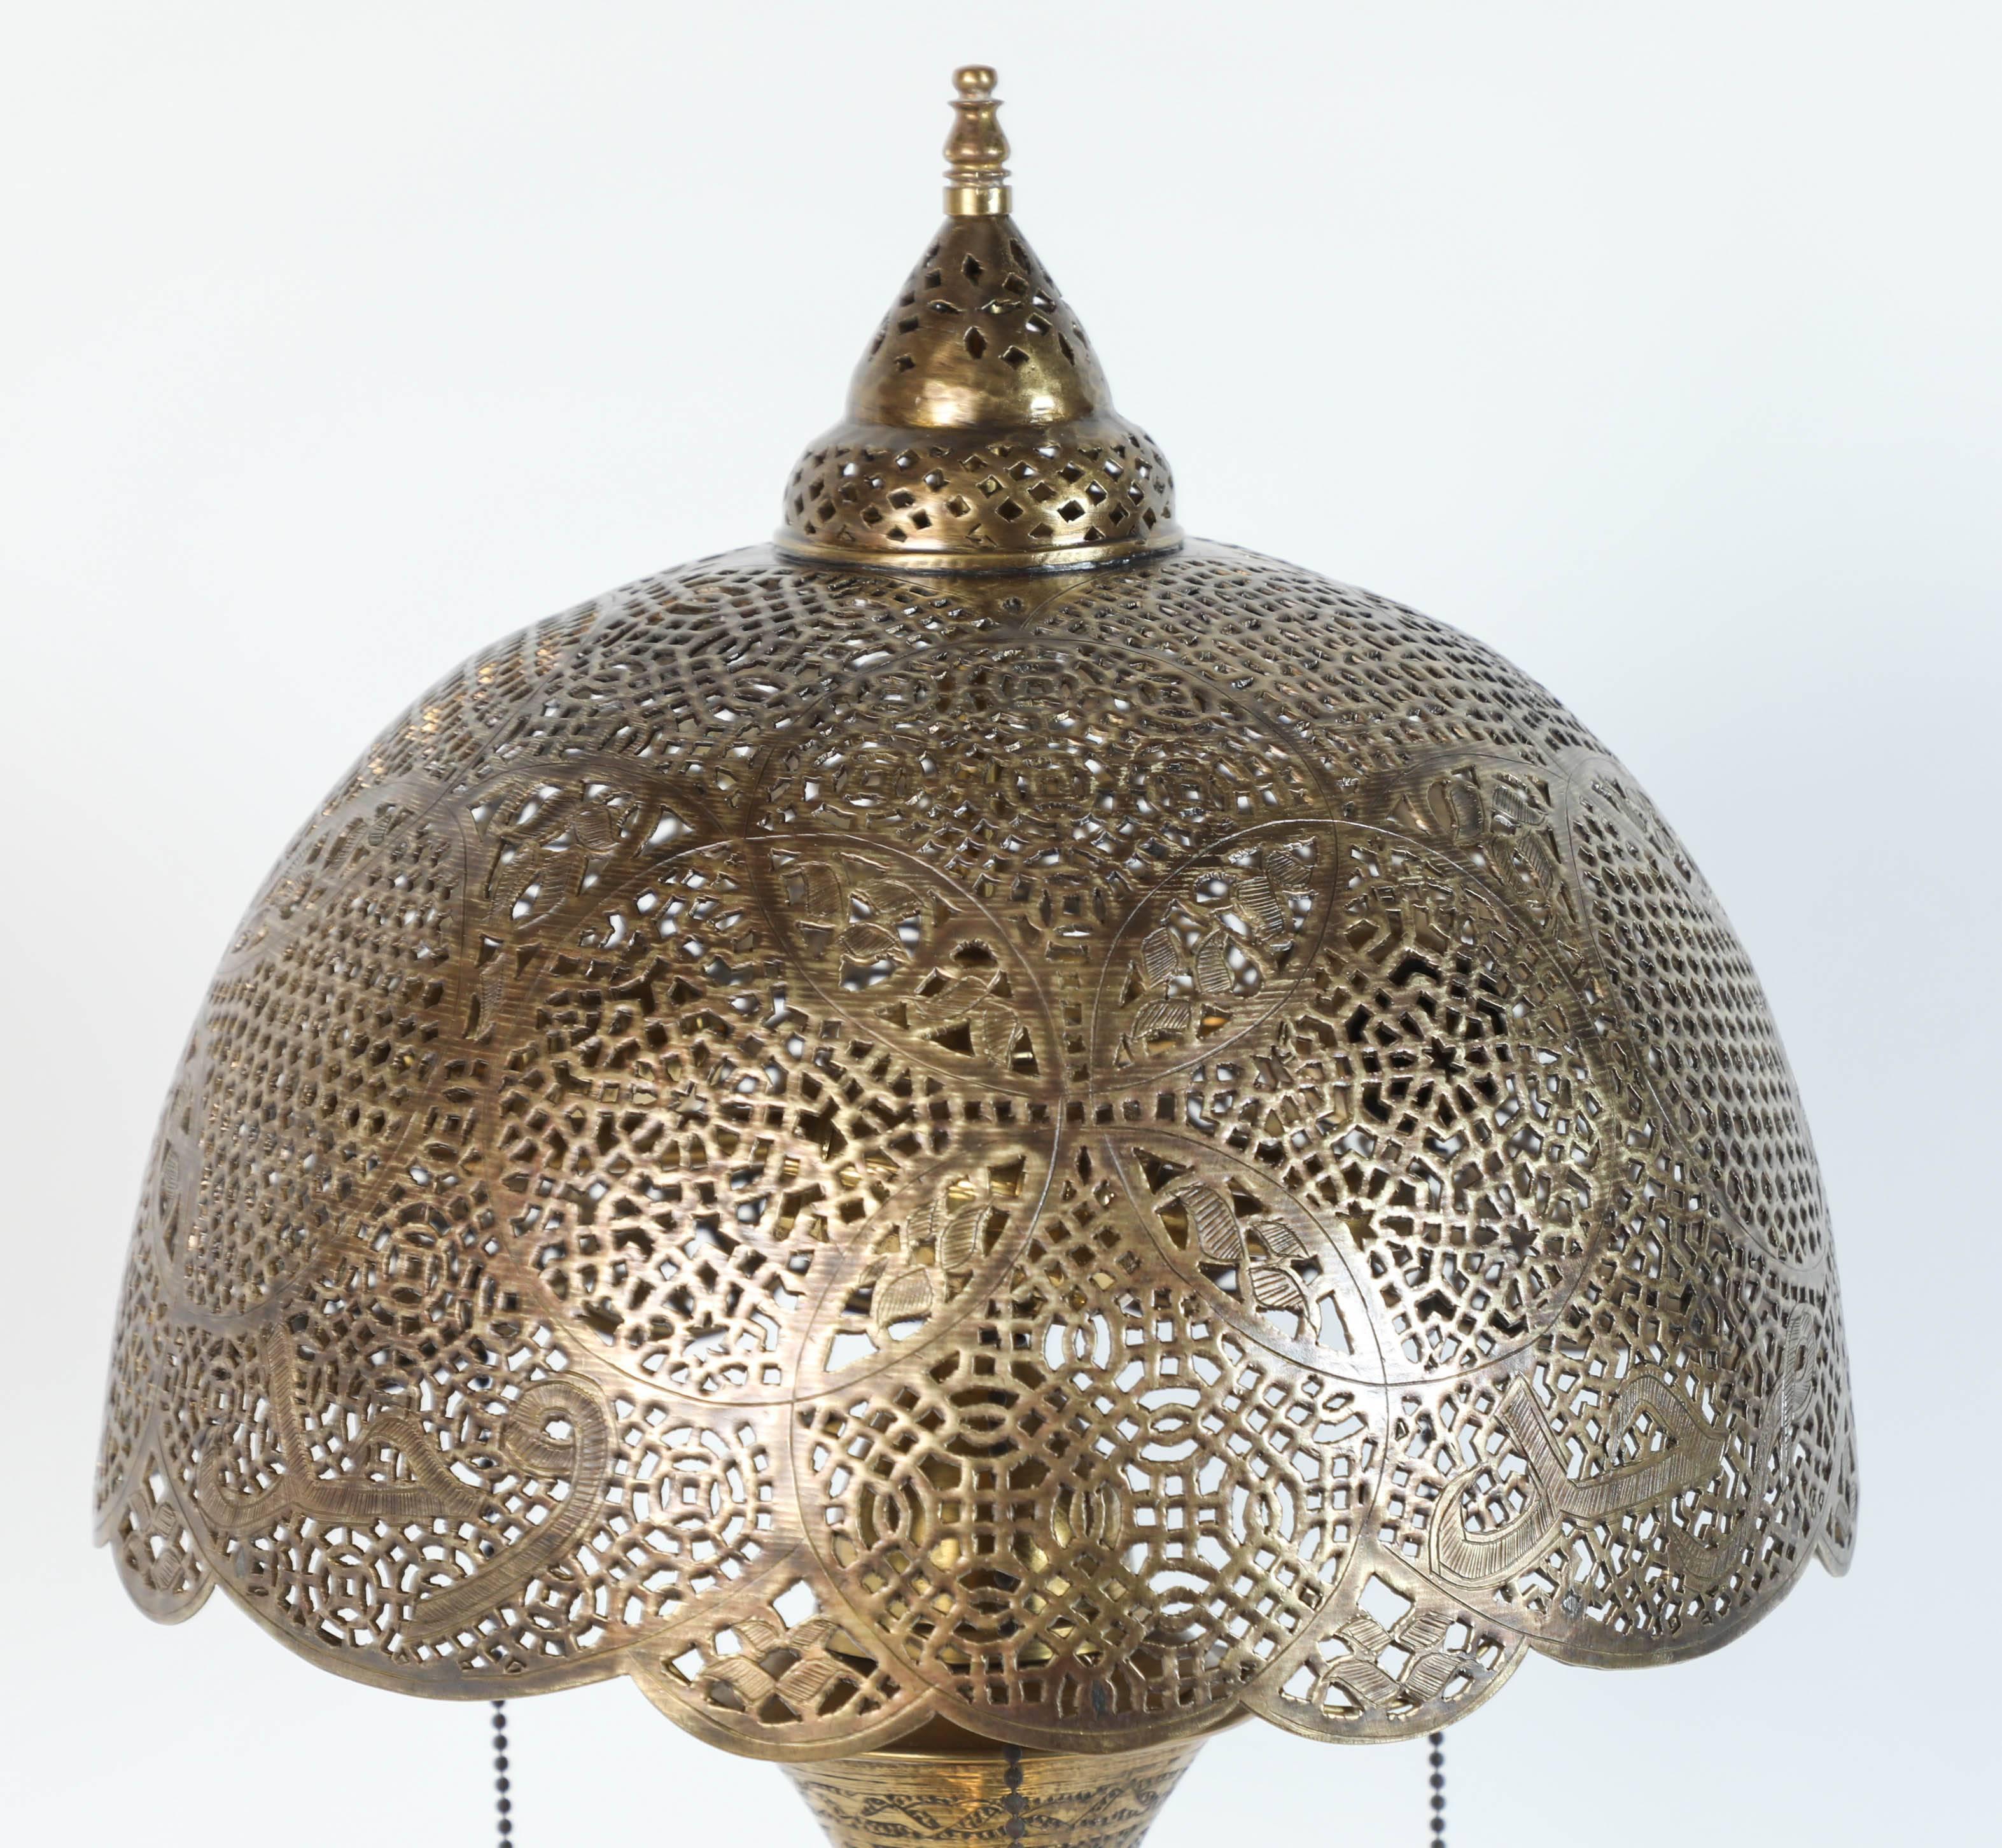 Very fine antique Middle Eastern Syrian Moorish revival with Arabic calligraphy writing.
Moorish Syrian brass table lamp with hammered brass with fine Islamic designs on stand and hand-cut filigree Persian style shade.
Rewired with three